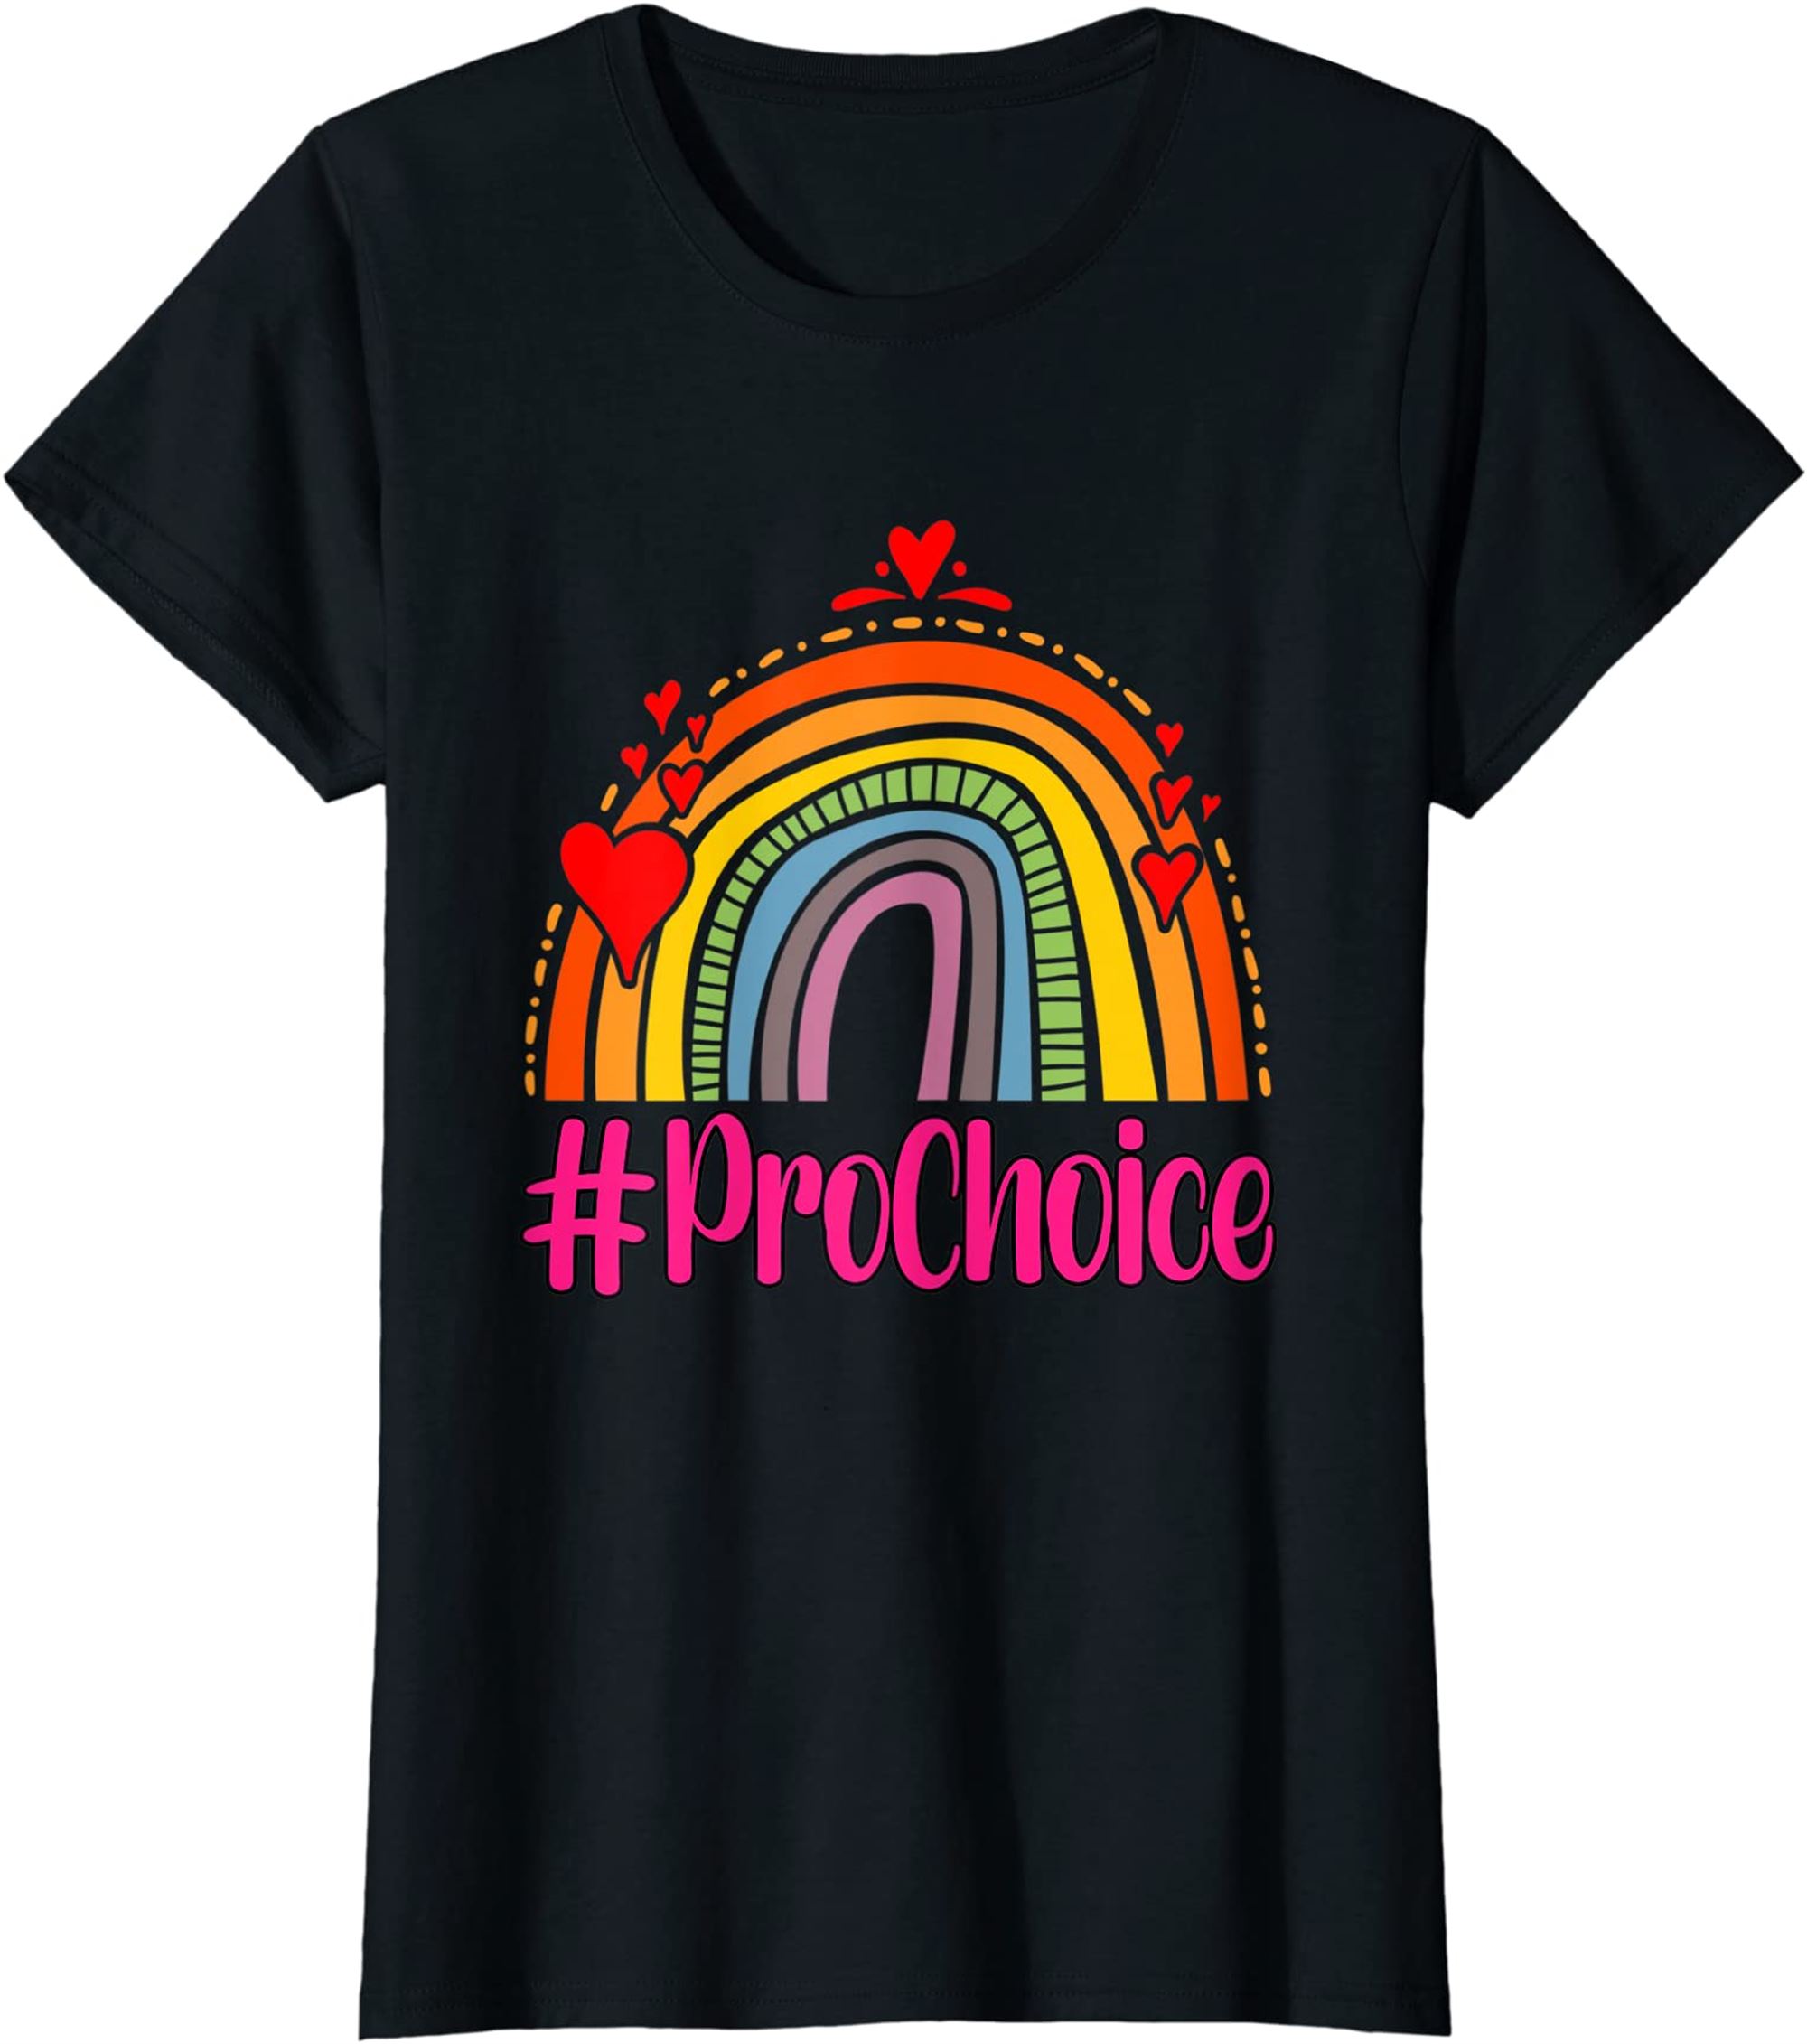 Womens Prochoice Rainbow Feminism Reproductice Right T-shirt Plus Size Up To 5xl